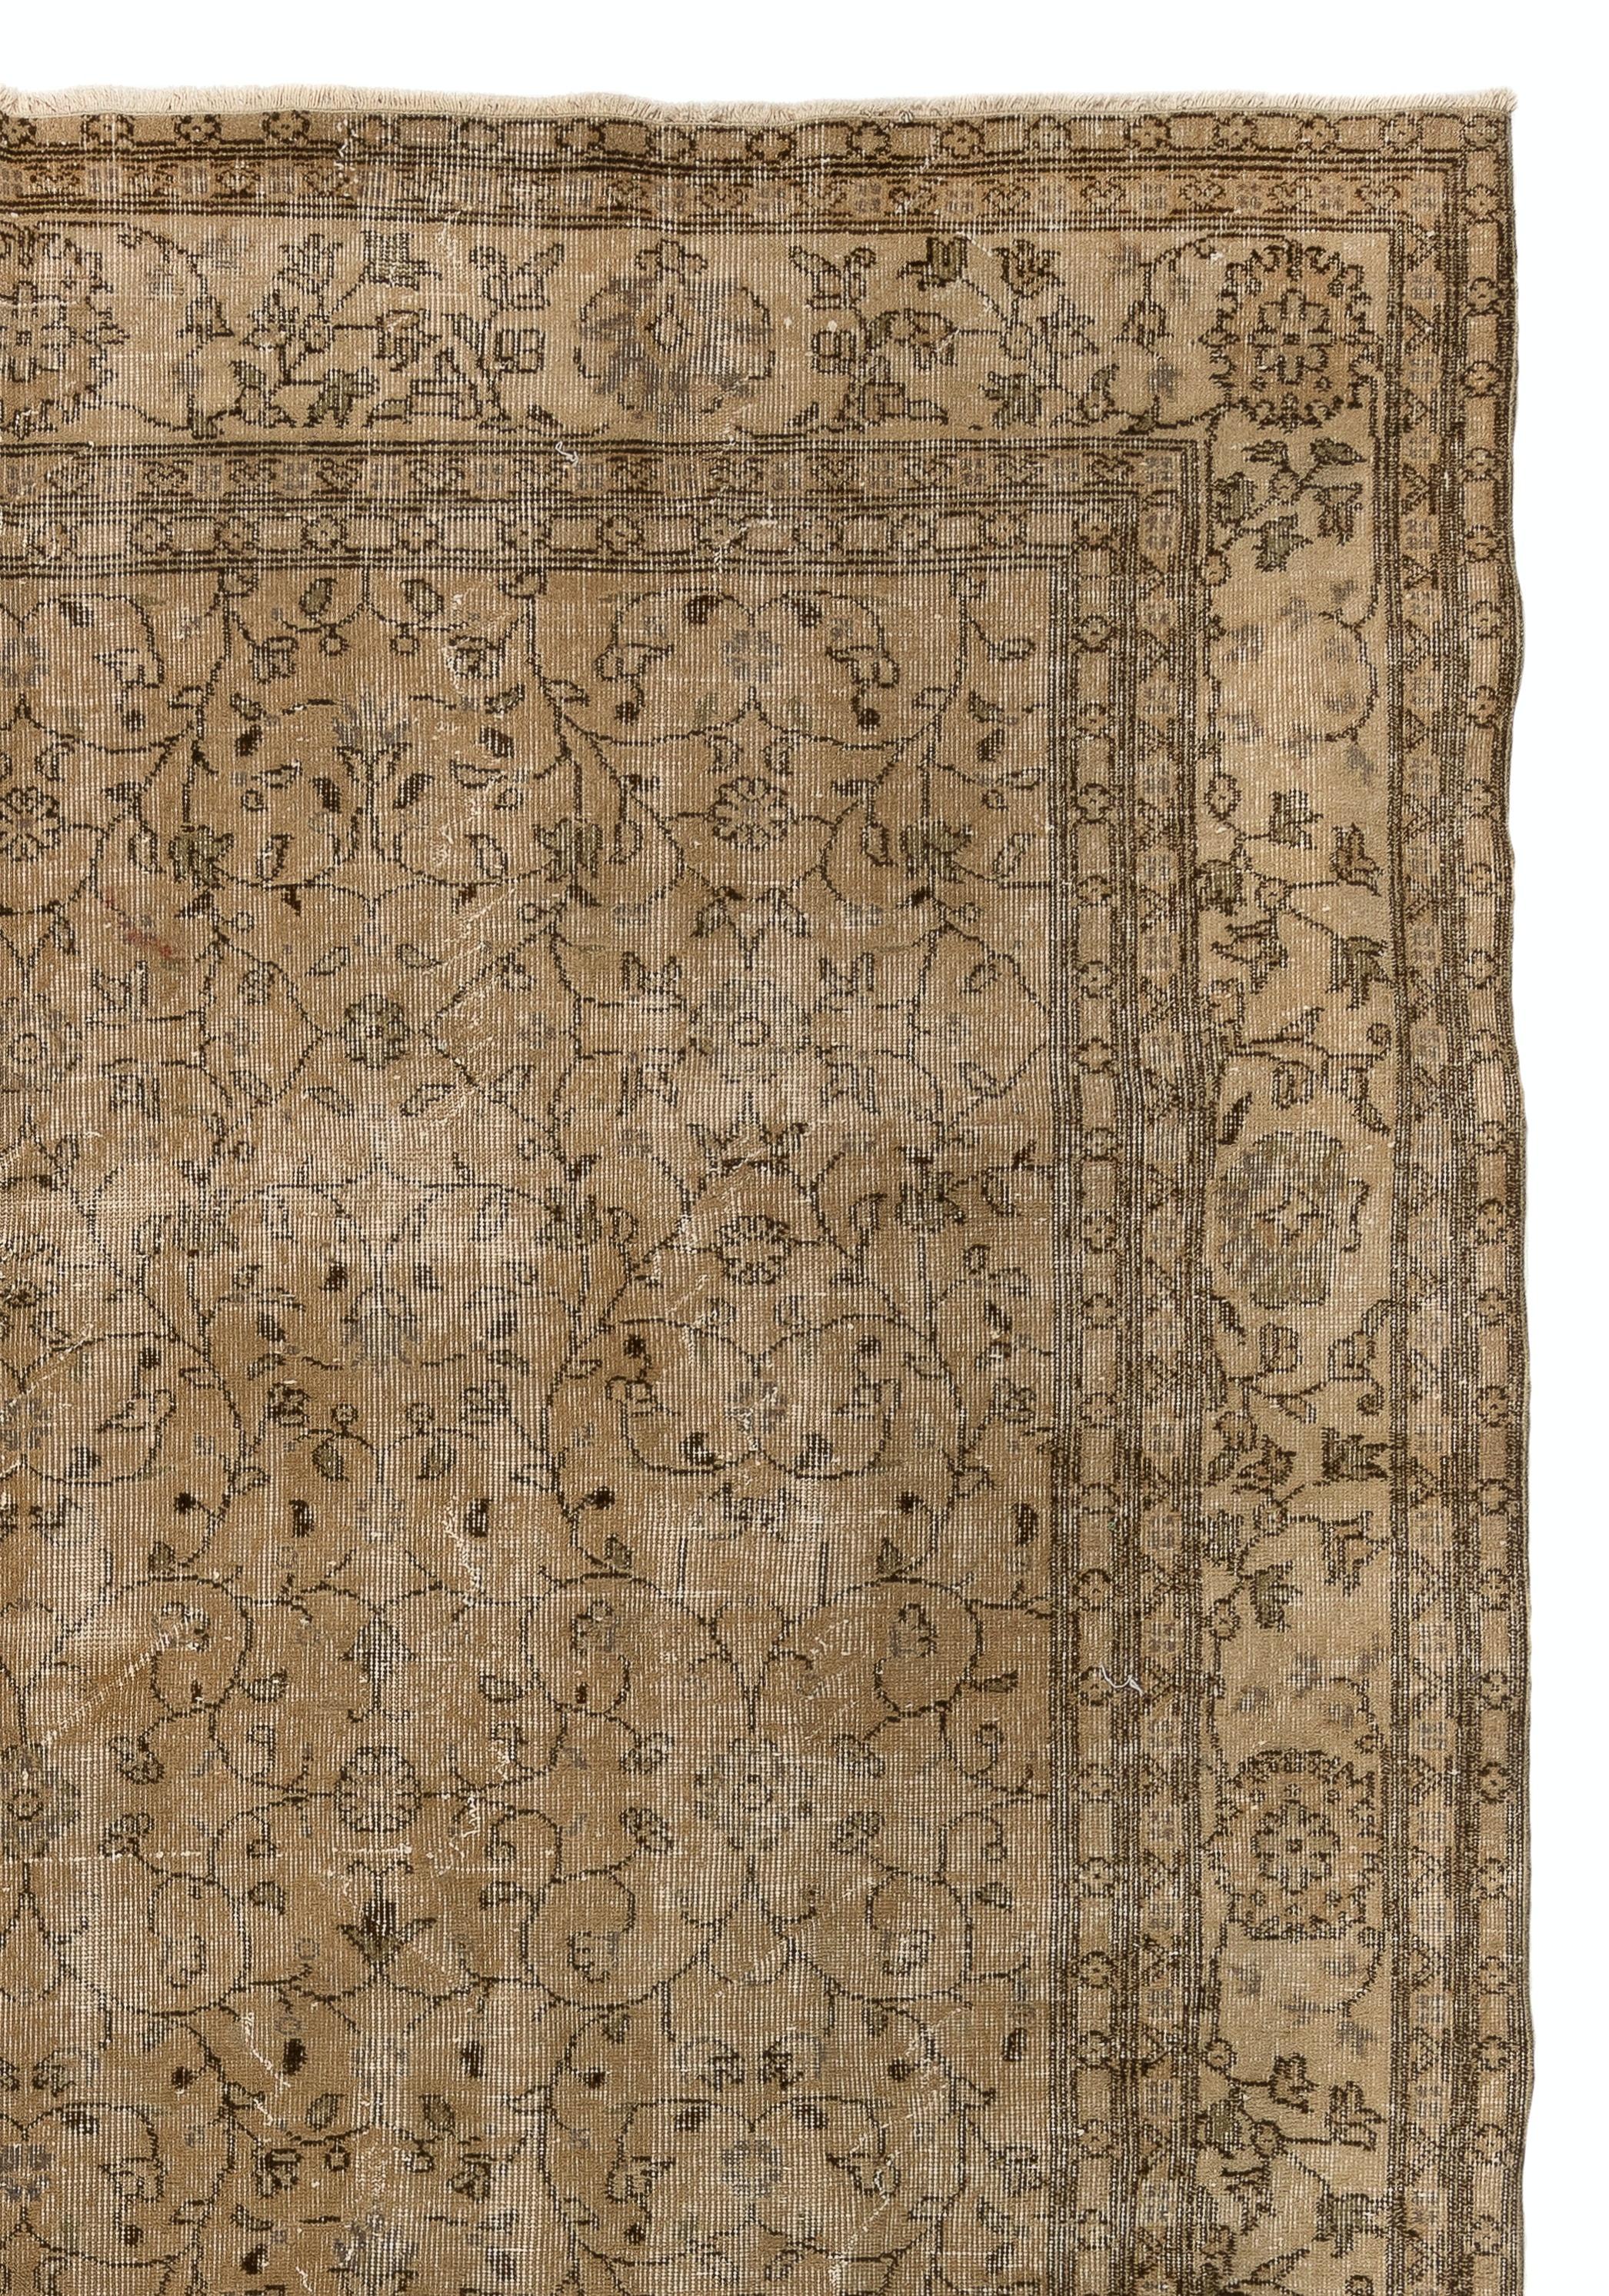 Turkish 8.6x11.7 Ft One of a Kind Vintage Oushak Area Rug with All-Over Floral Design For Sale